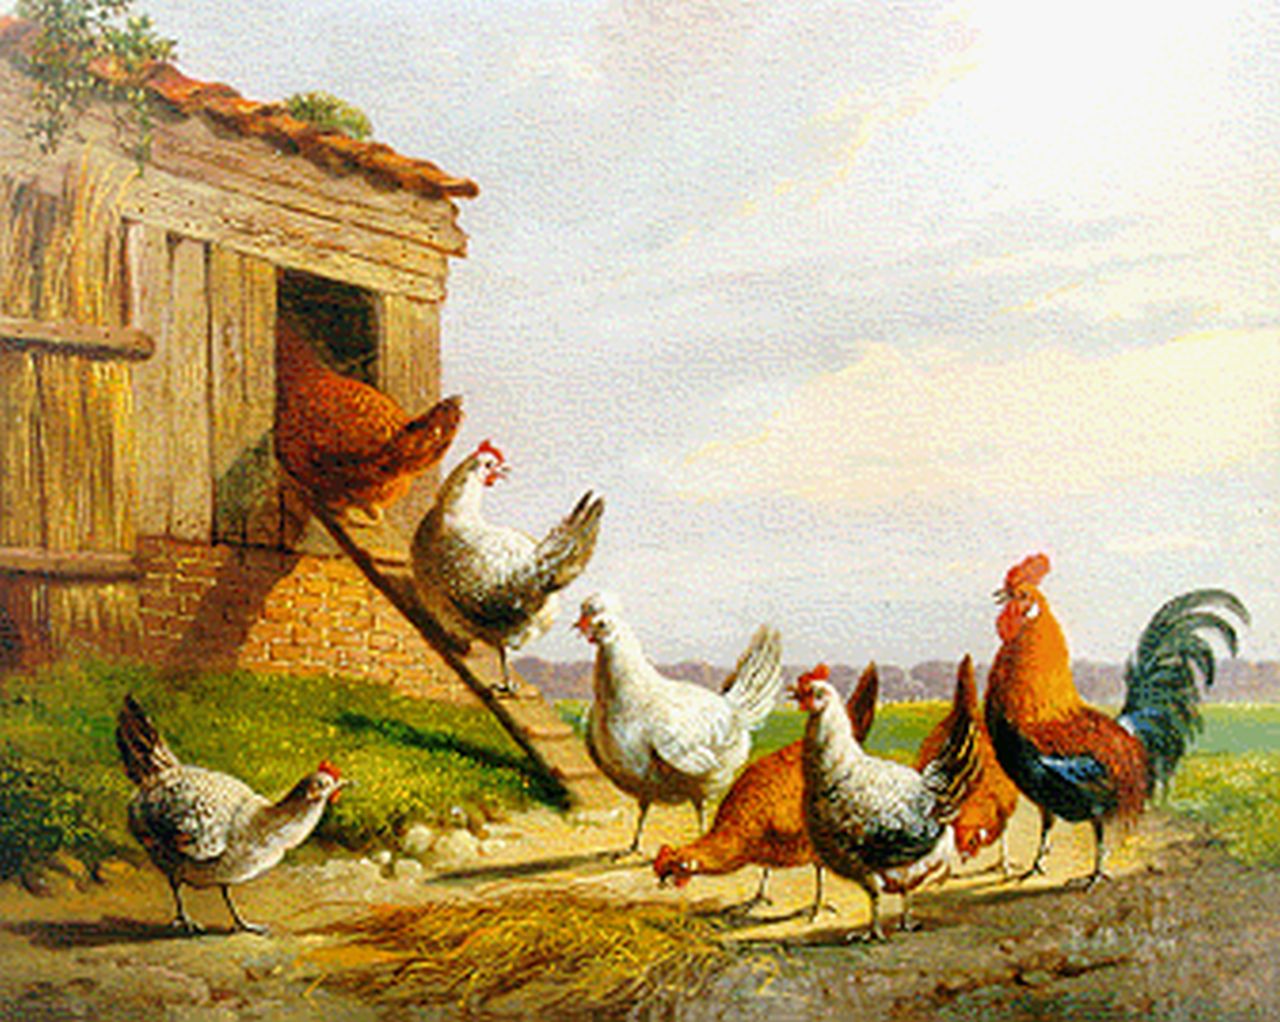 Verhoesen A.  | Albertus Verhoesen, Poultry in a landscape, oil on panel 13.5 x 17.1 cm, signed l.r. and dated 1871